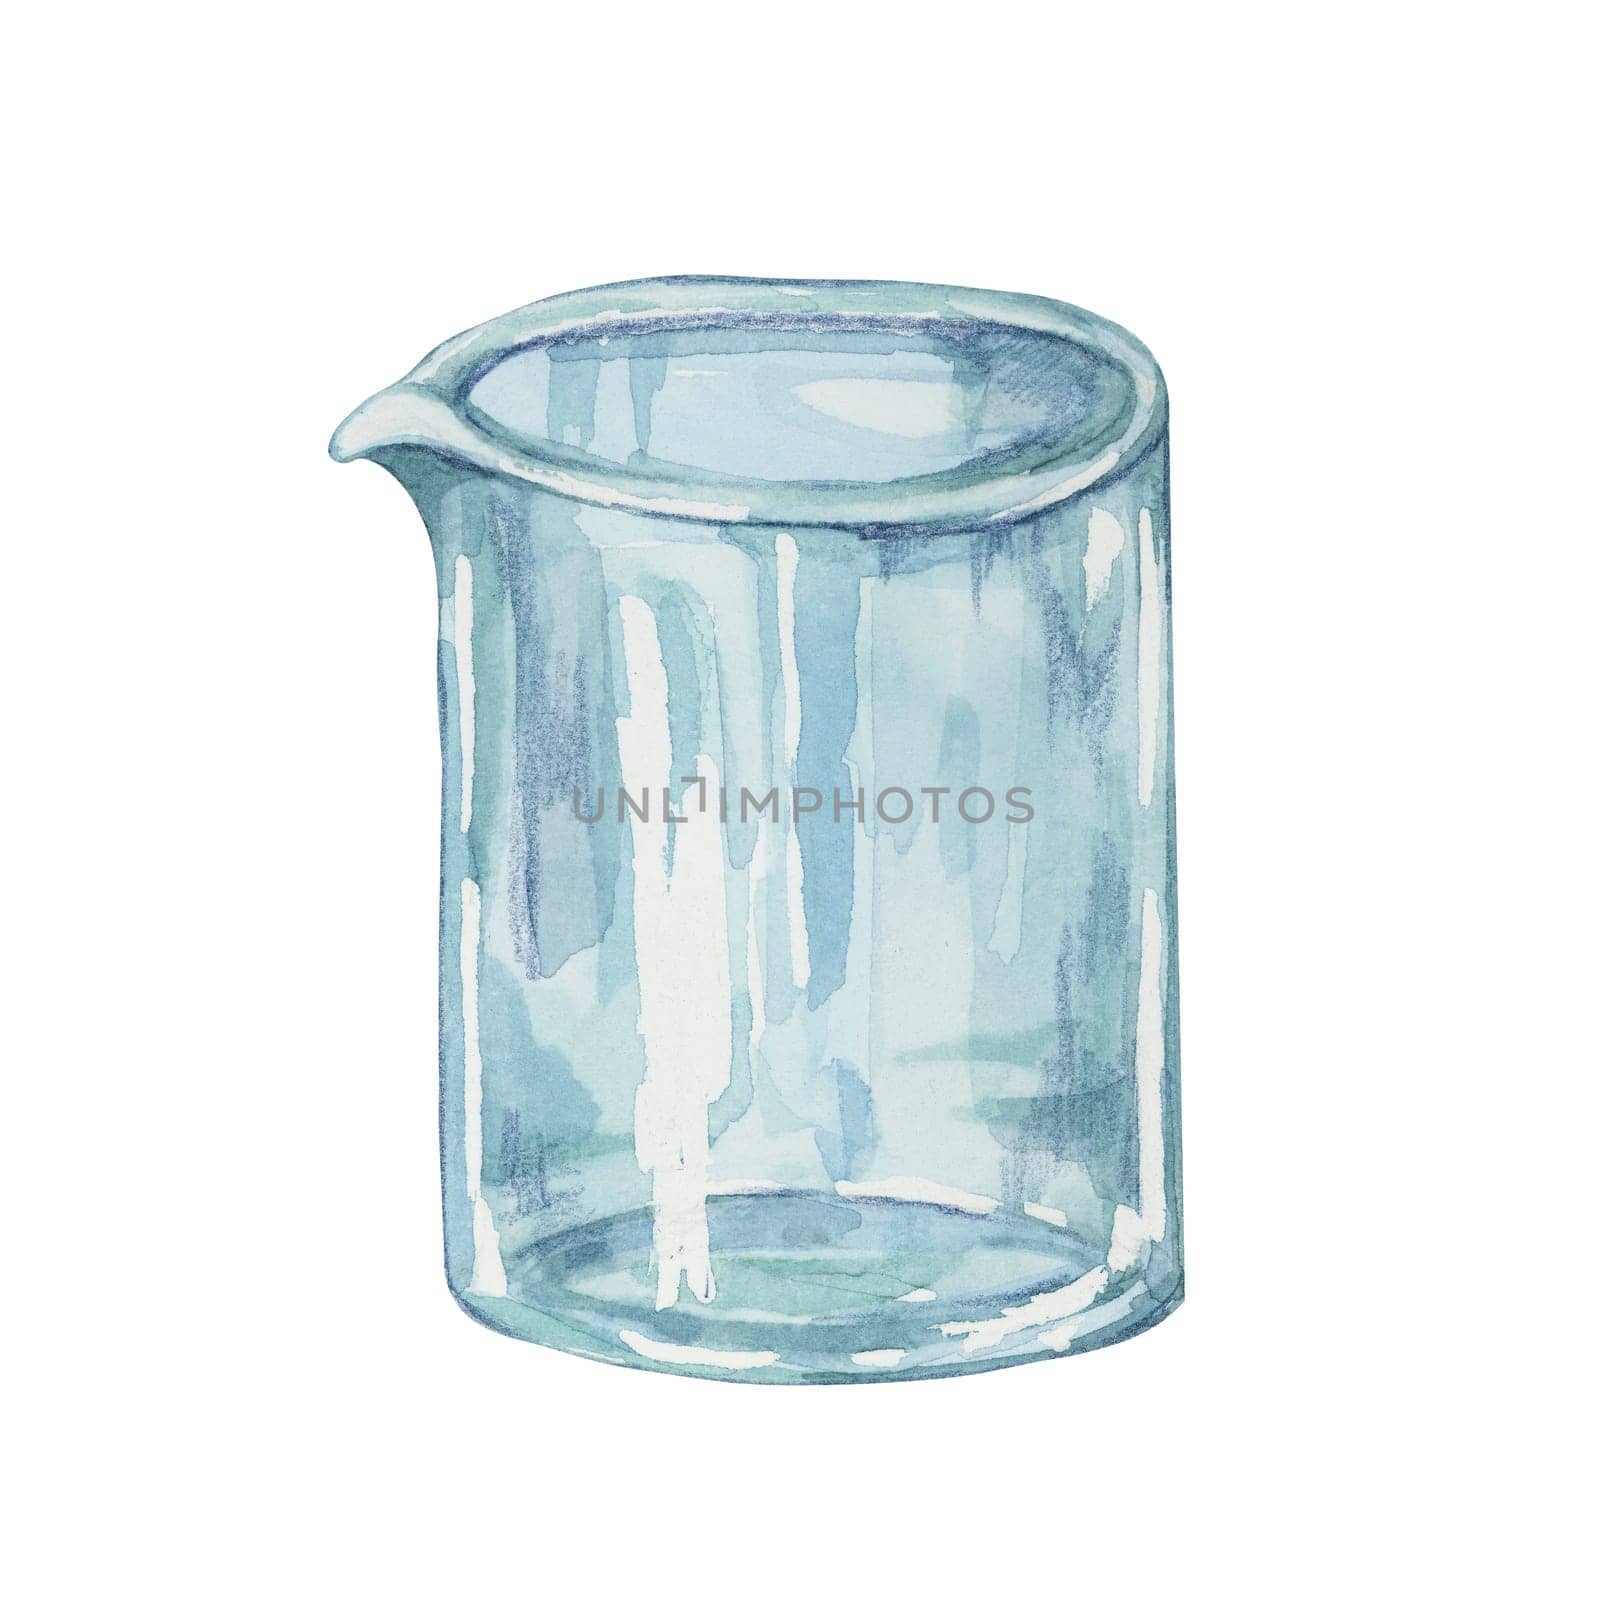 Empty glass beaker. Hand drawn watercolor illustration of chemistry, science equipment. Cylinder glassware isolated clipart, educational illustration by Fofito